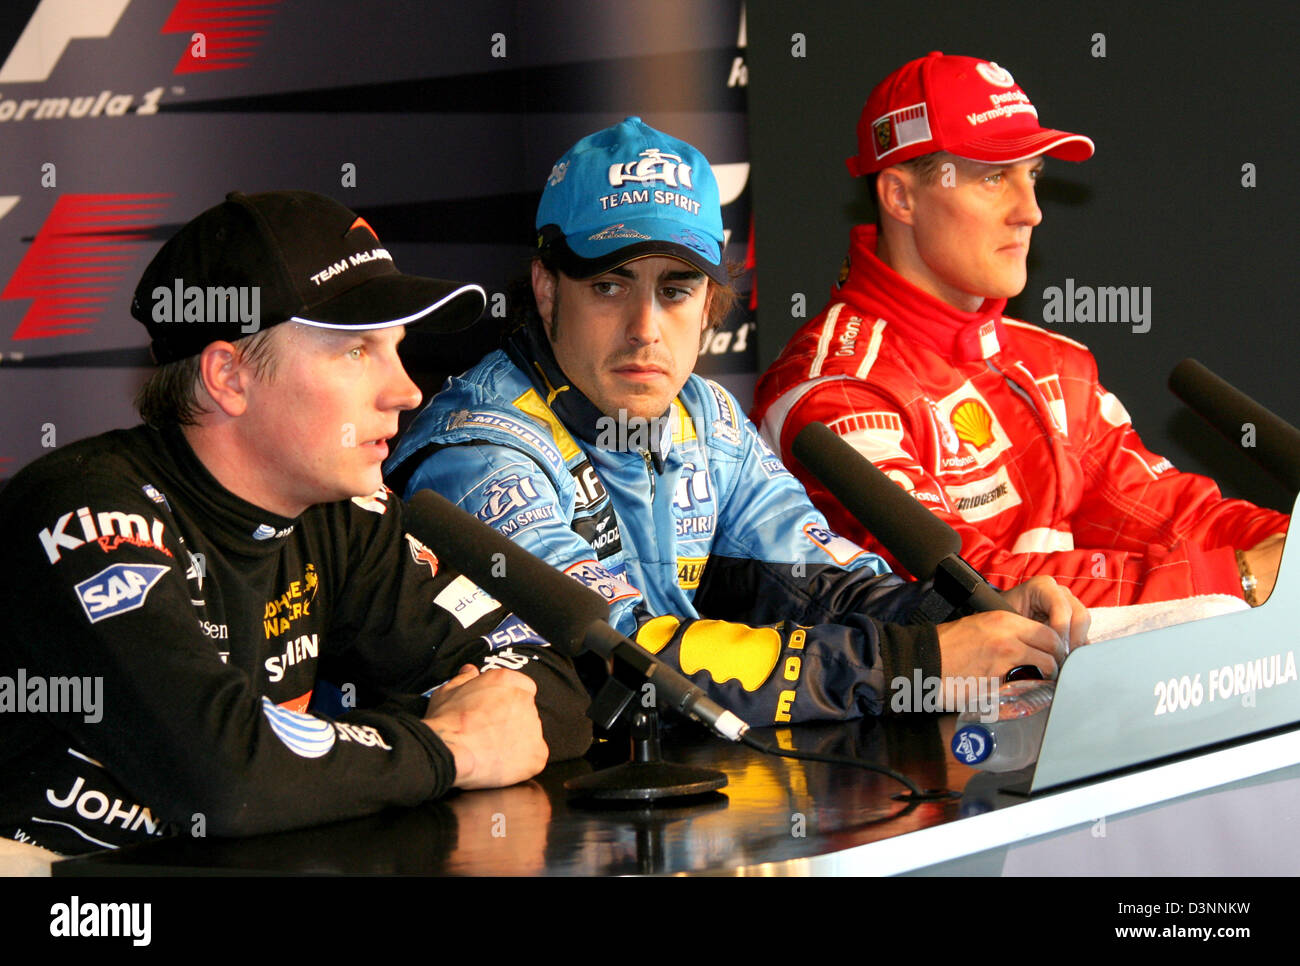 Formula One pilots (L-R) Finnish Kimi Raikkonen of McLaren Mercedes,  Spanish Fernando Alonso of Renault and German Michael Schumacher of Ferrari  at the press conference after the Qualifying session to tomorrow's 2006